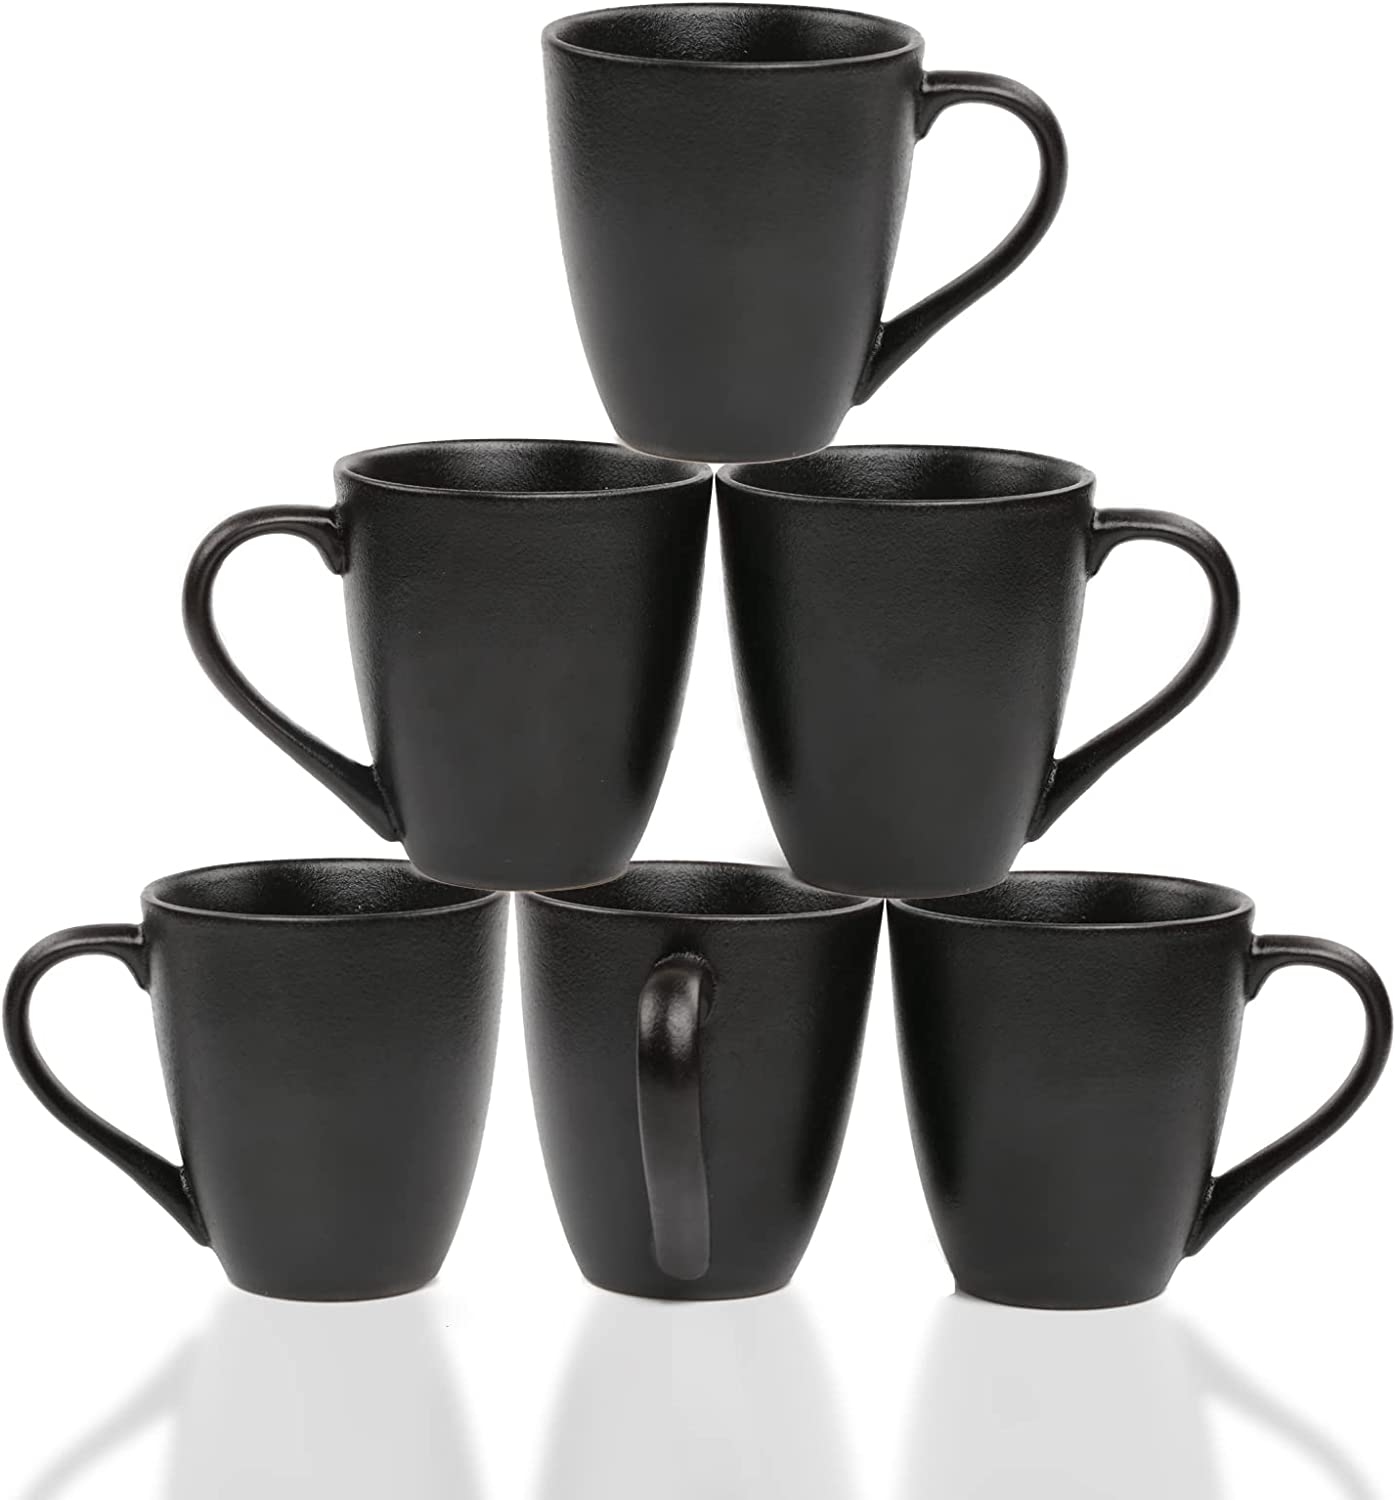 MALACASA 12 Ounce Porcelain Cups Handle Ceramic Drink Cup Set, Set of 6 for Wate